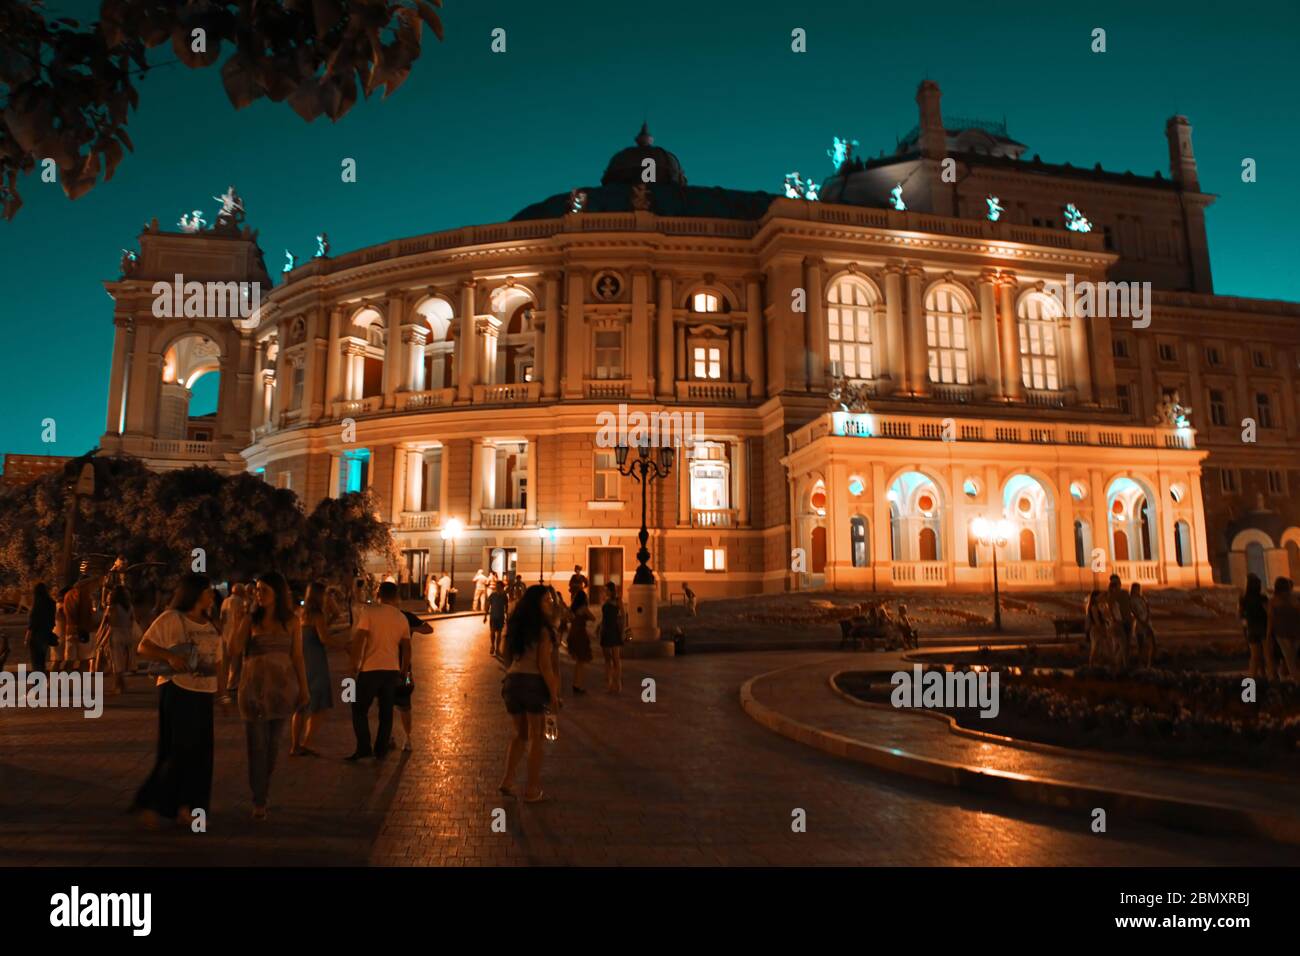 ODESSA, UKRAINE - JULY 21, 2012: Odessa National Academic Theatre of Opera and Ballet. The building's facade is decorated in the Italian baroque style Stock Photo